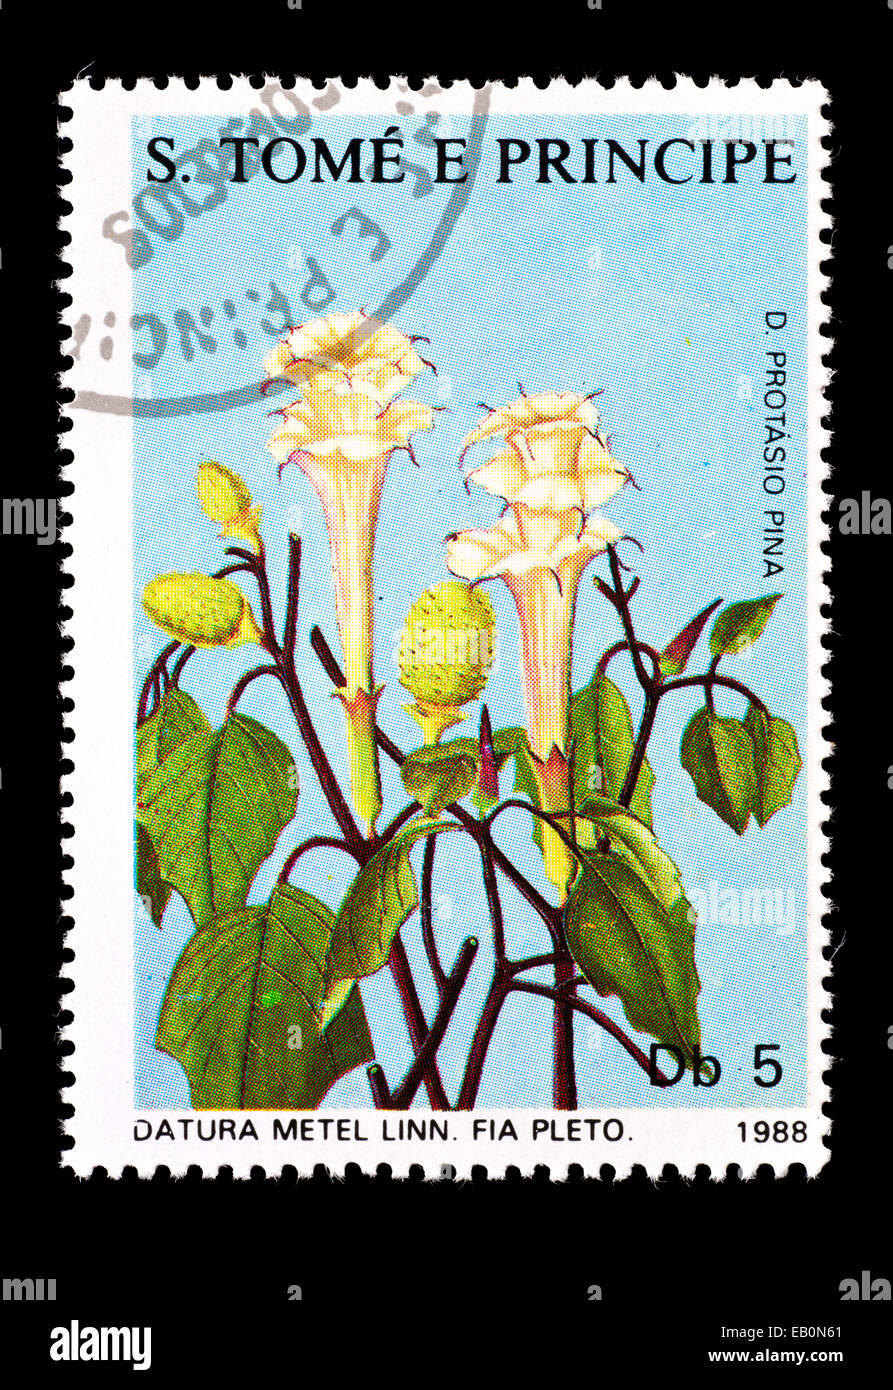 Postage stamp from Saint Thomas and Prince Islands depicting devil's trumpet (Datura metel) Stock Photo